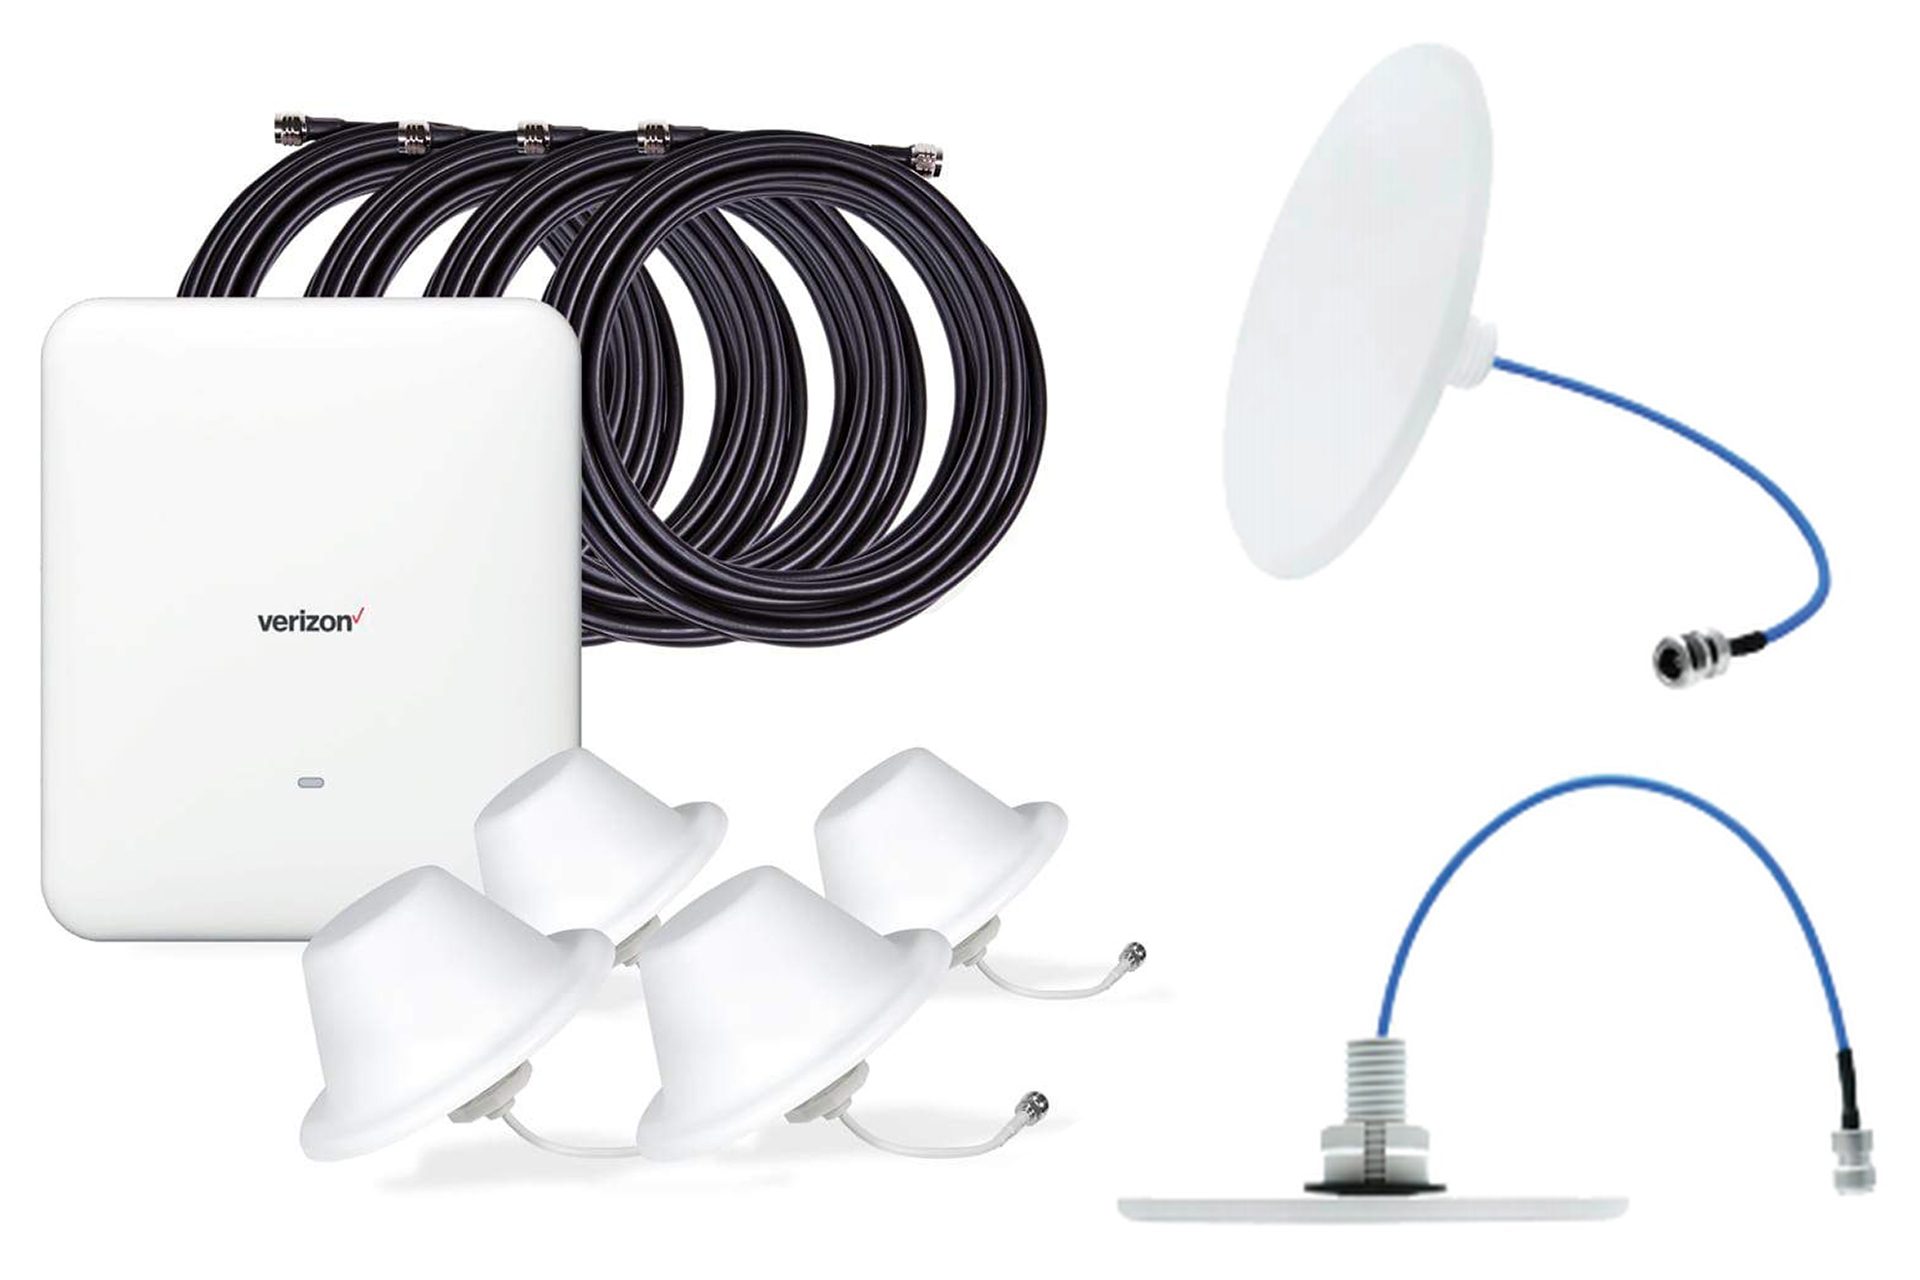 Cell station coverage may be extended with the use of additoinal antennas to evenly distribute signal to varios areas of larger residences.  Above is a Verizon cell station shown with four indoor ceiling antennas and its GPS device.  On the left side of the photo a thinner, more aesthetically pleasing antenna is shown as an alternative.